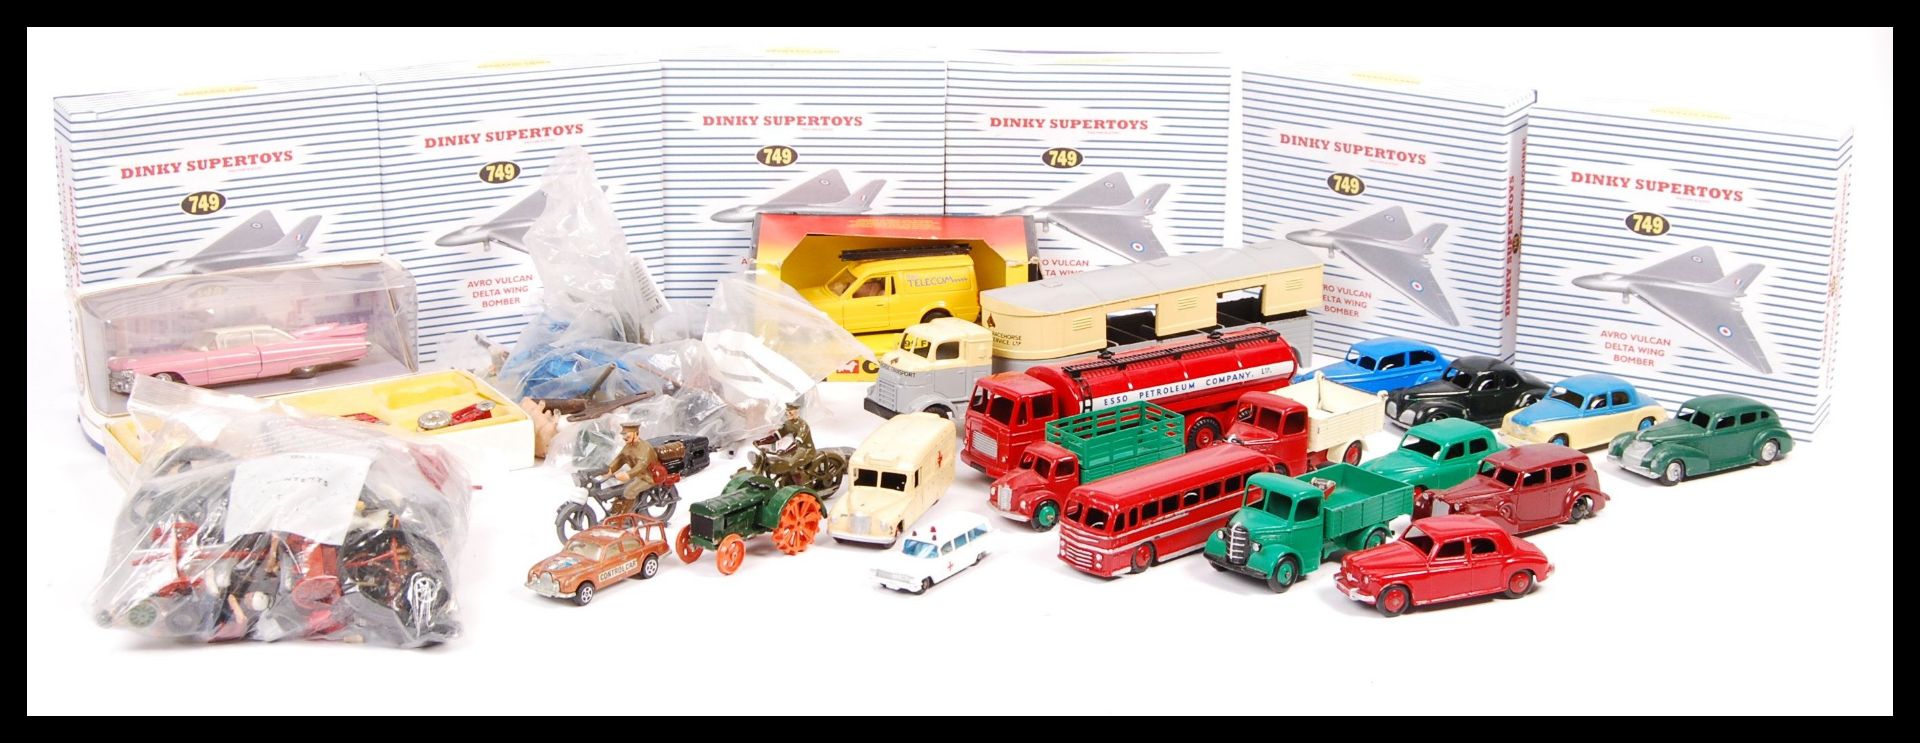 GOOD ASSORTMENT OF DIECAST MODELS - MOSTLY DINKY